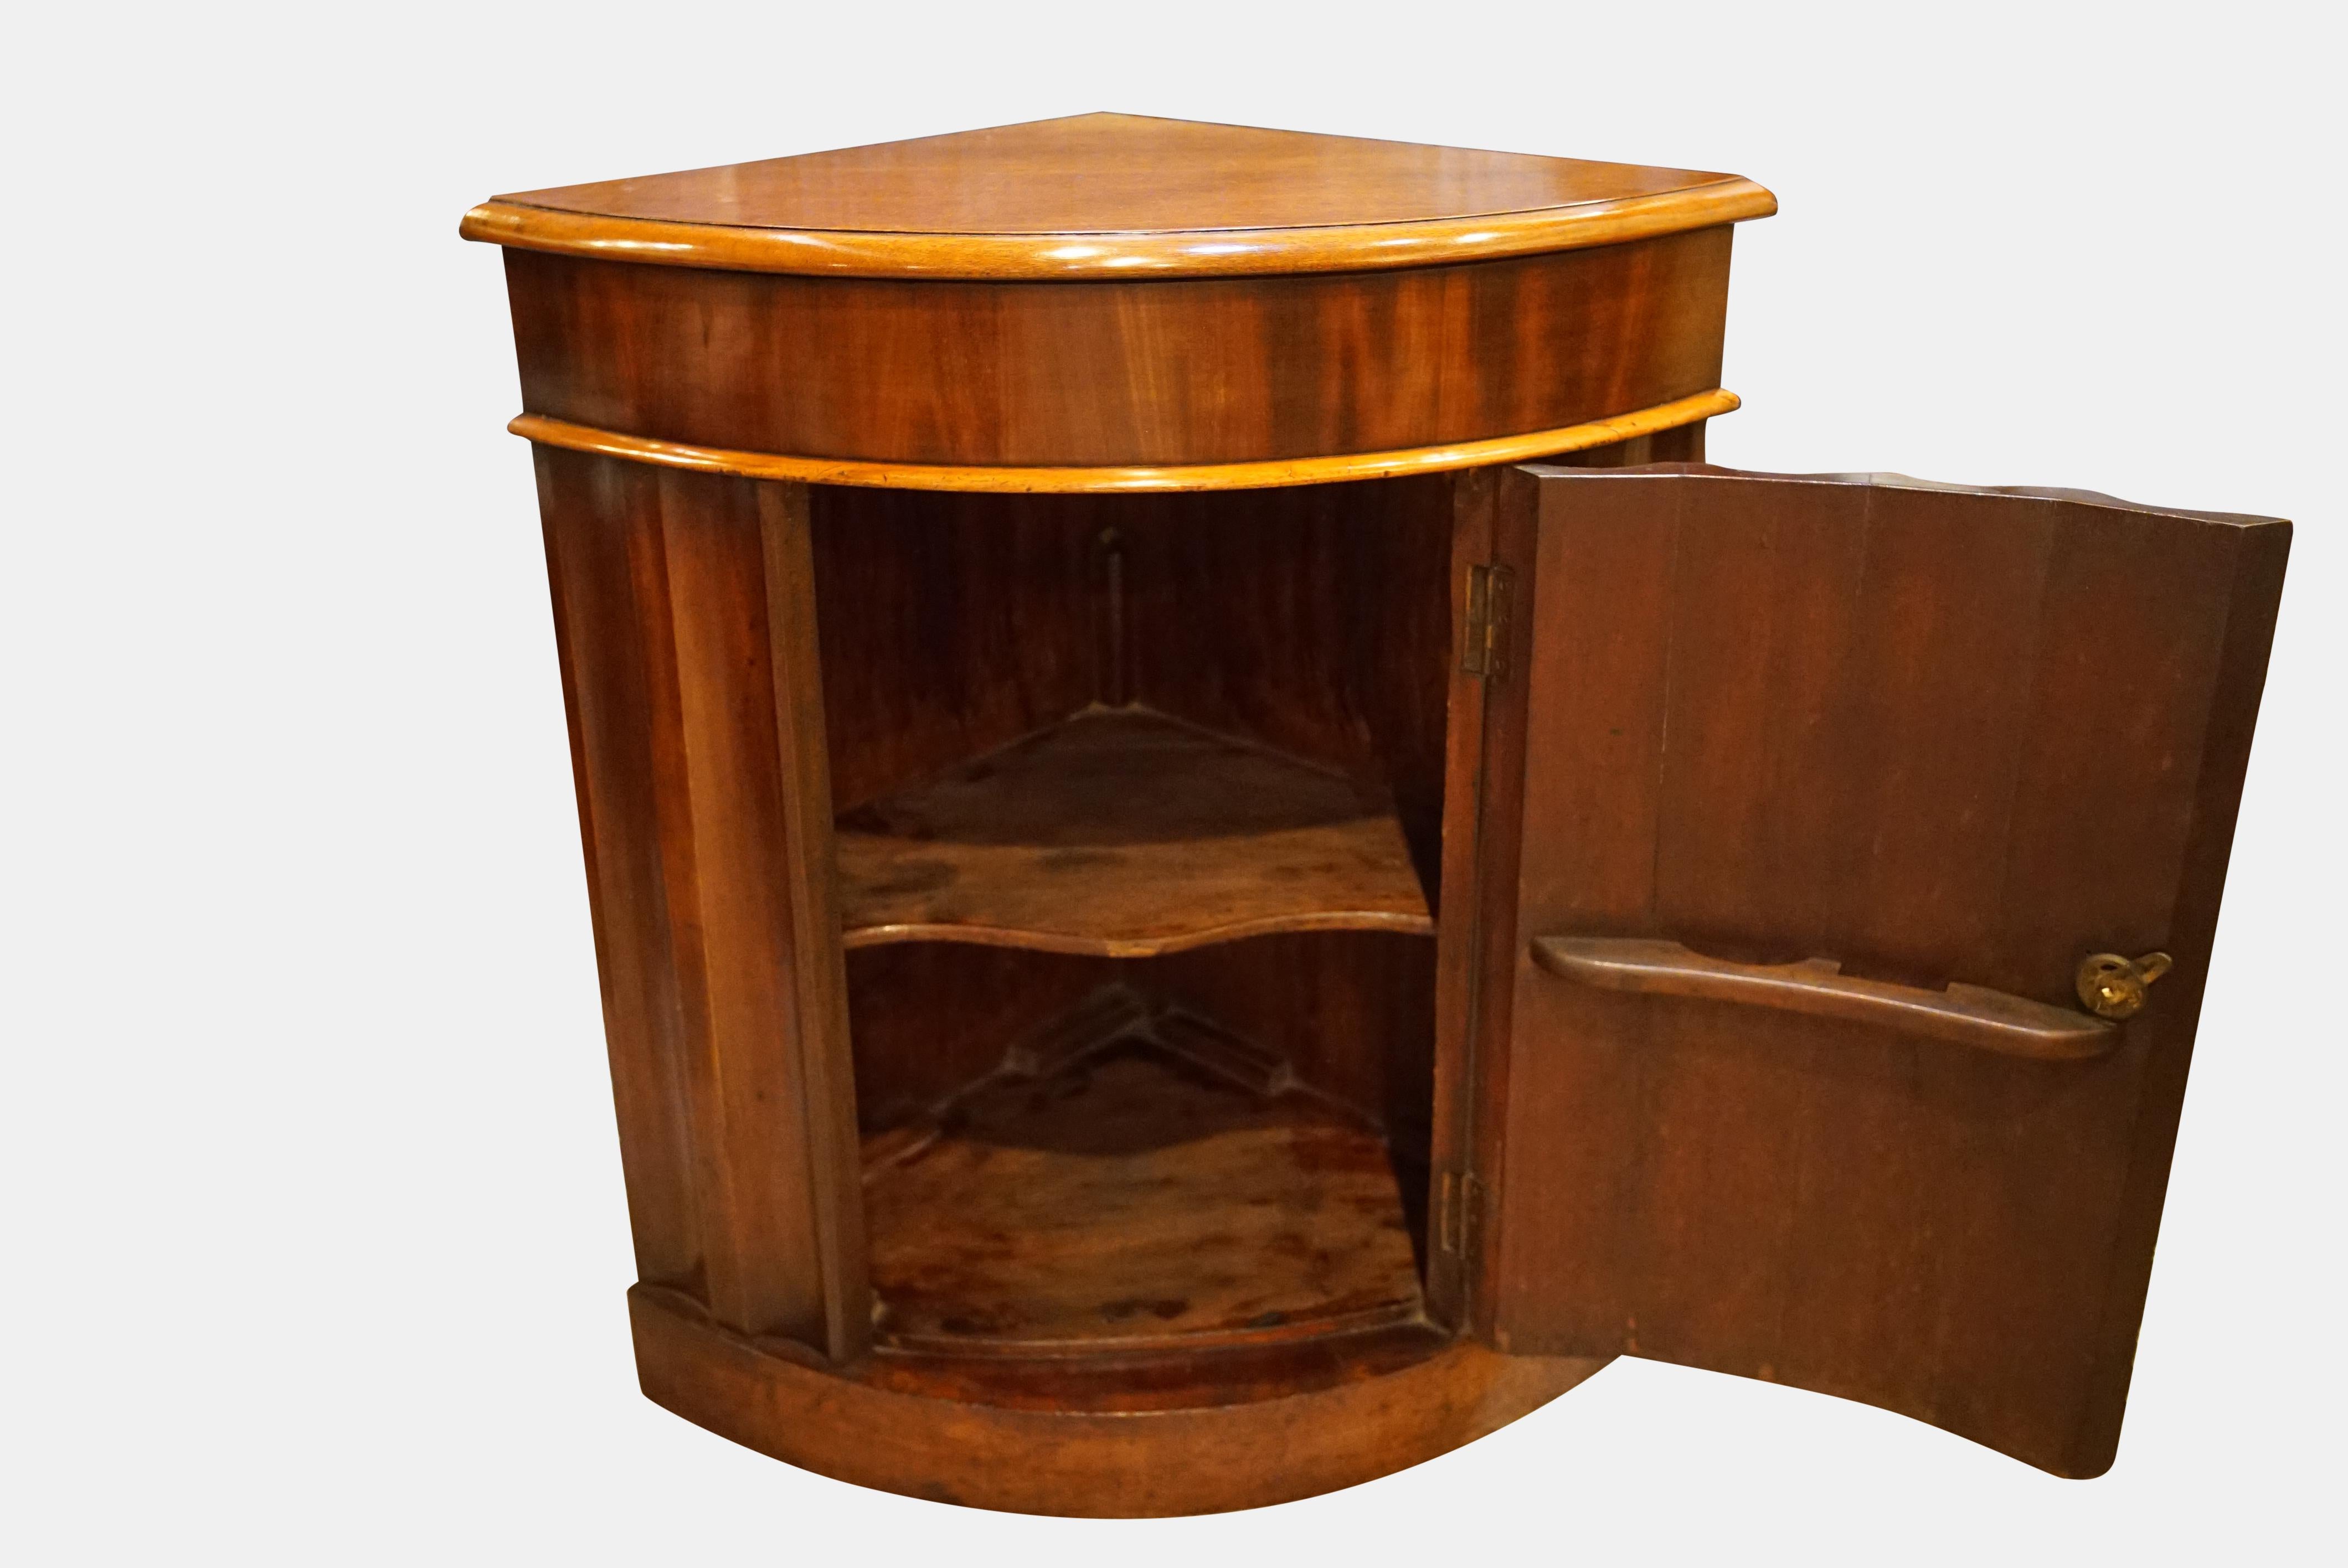 A mid-19th century mahogany corner cupboard with shaped front (top re-polished),

circa 1860.